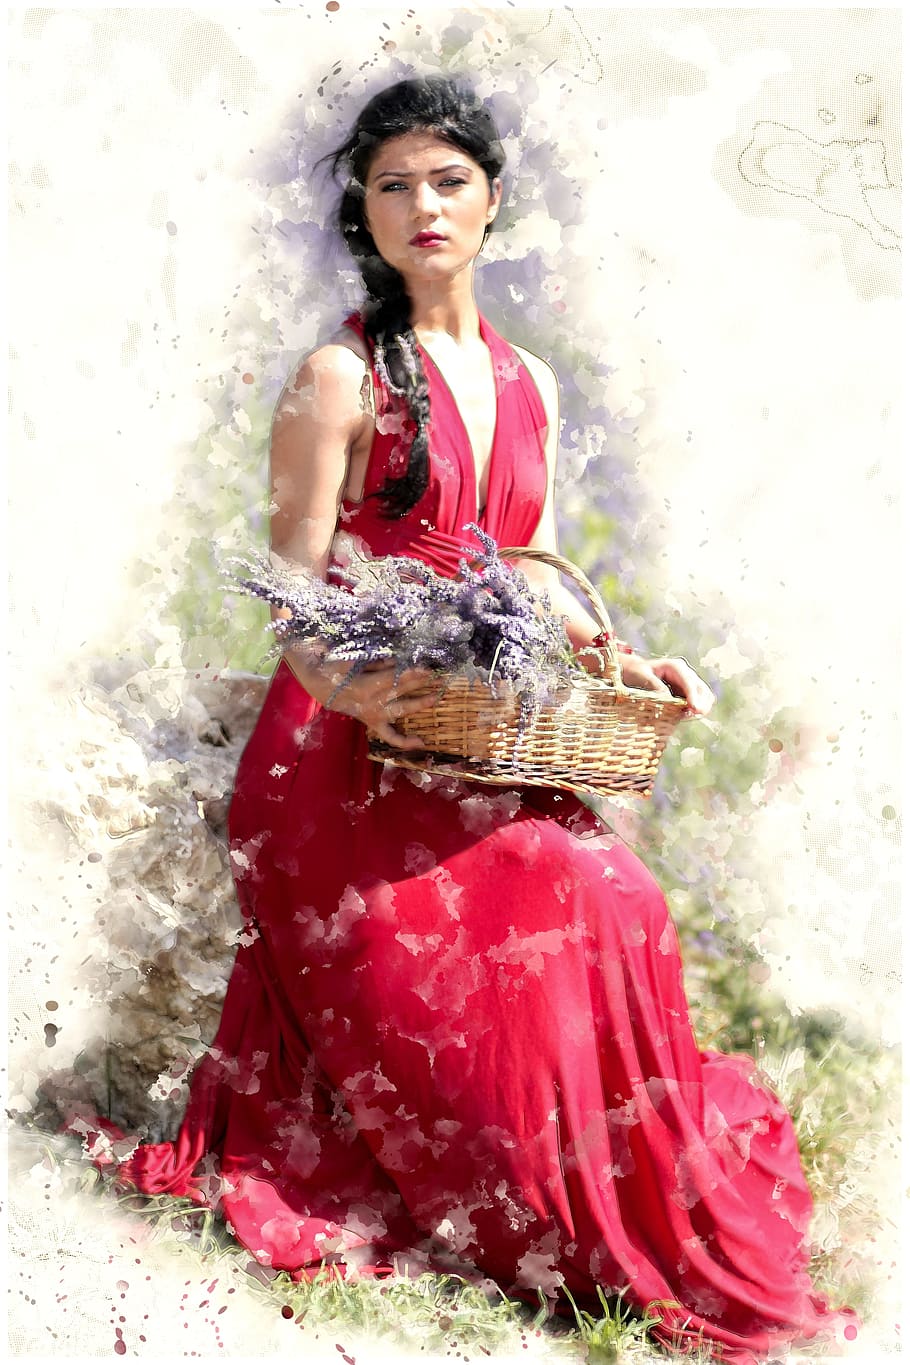 woman, carrying, basket artwork, girl, people, female, person, portrait, model, young